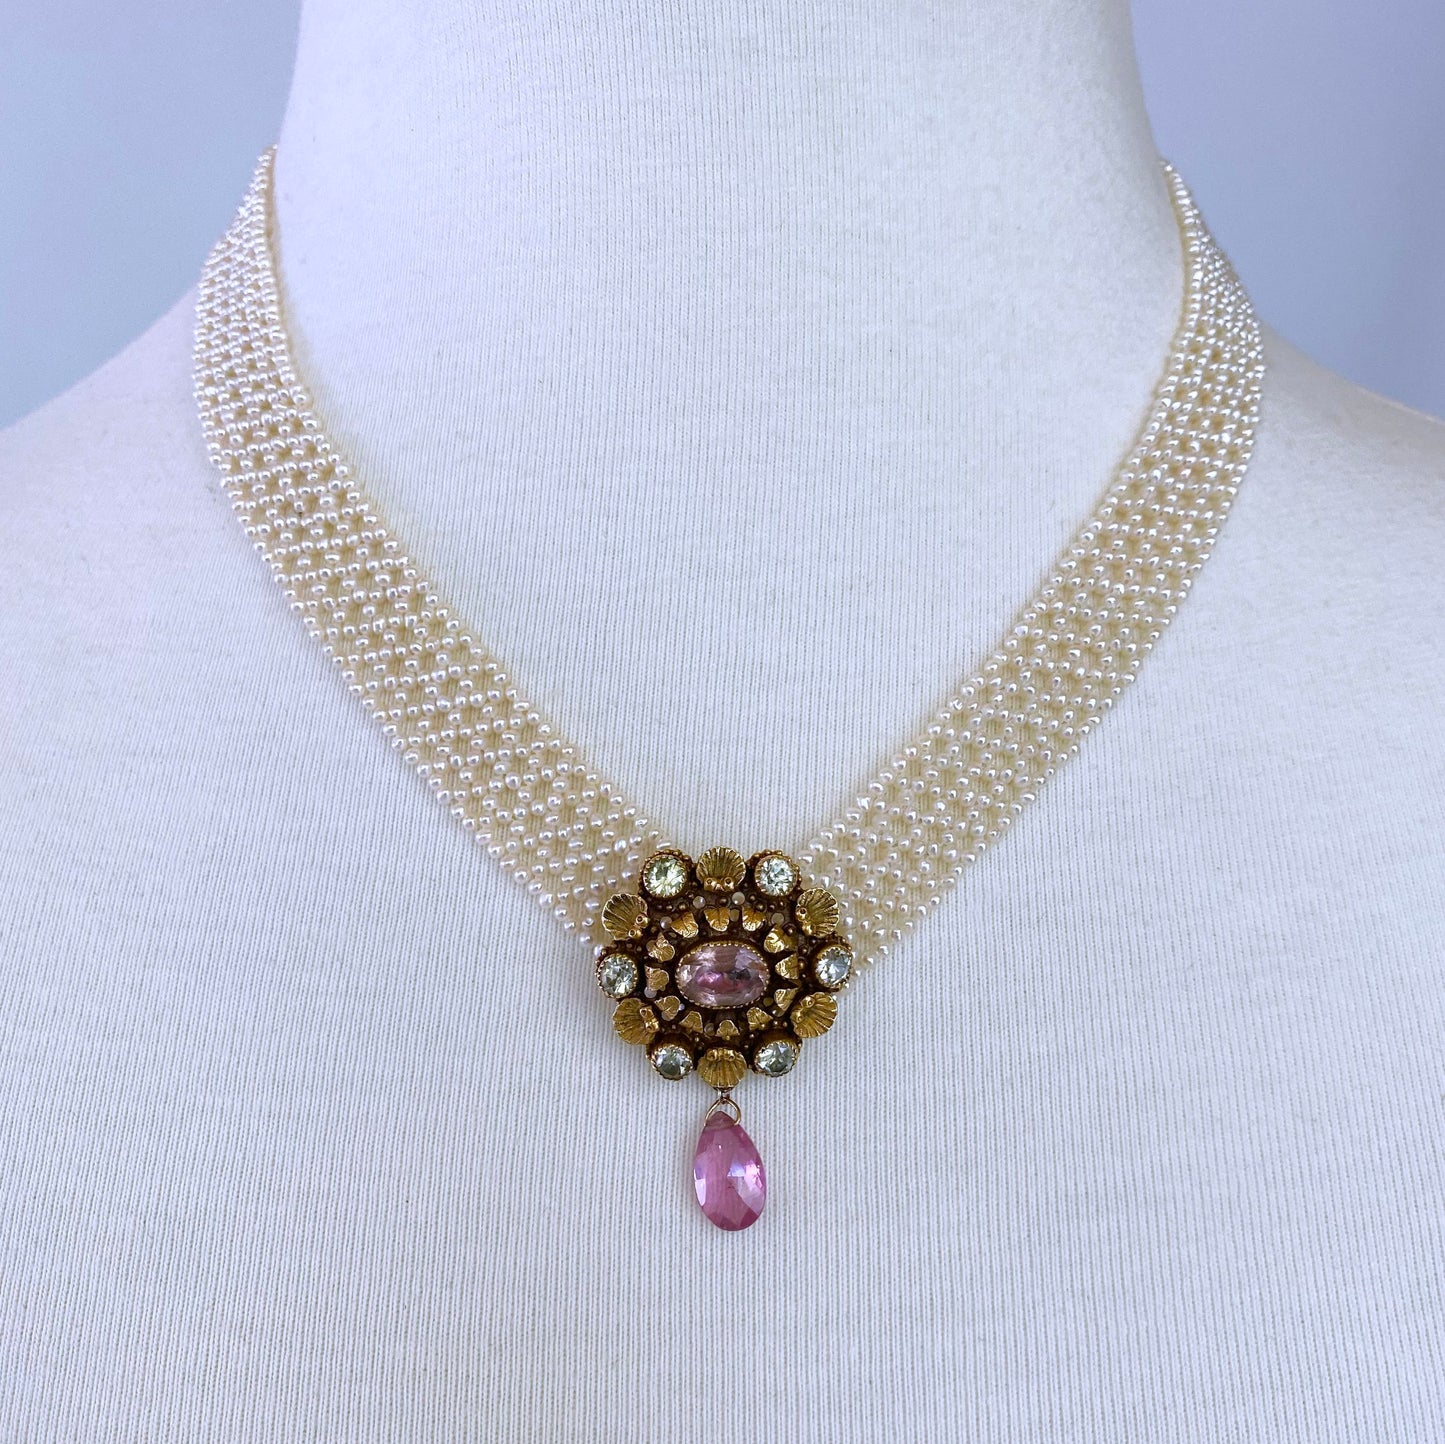 Woven Pearl "V" Necklace with Antique Diamond Clasp & Brooch